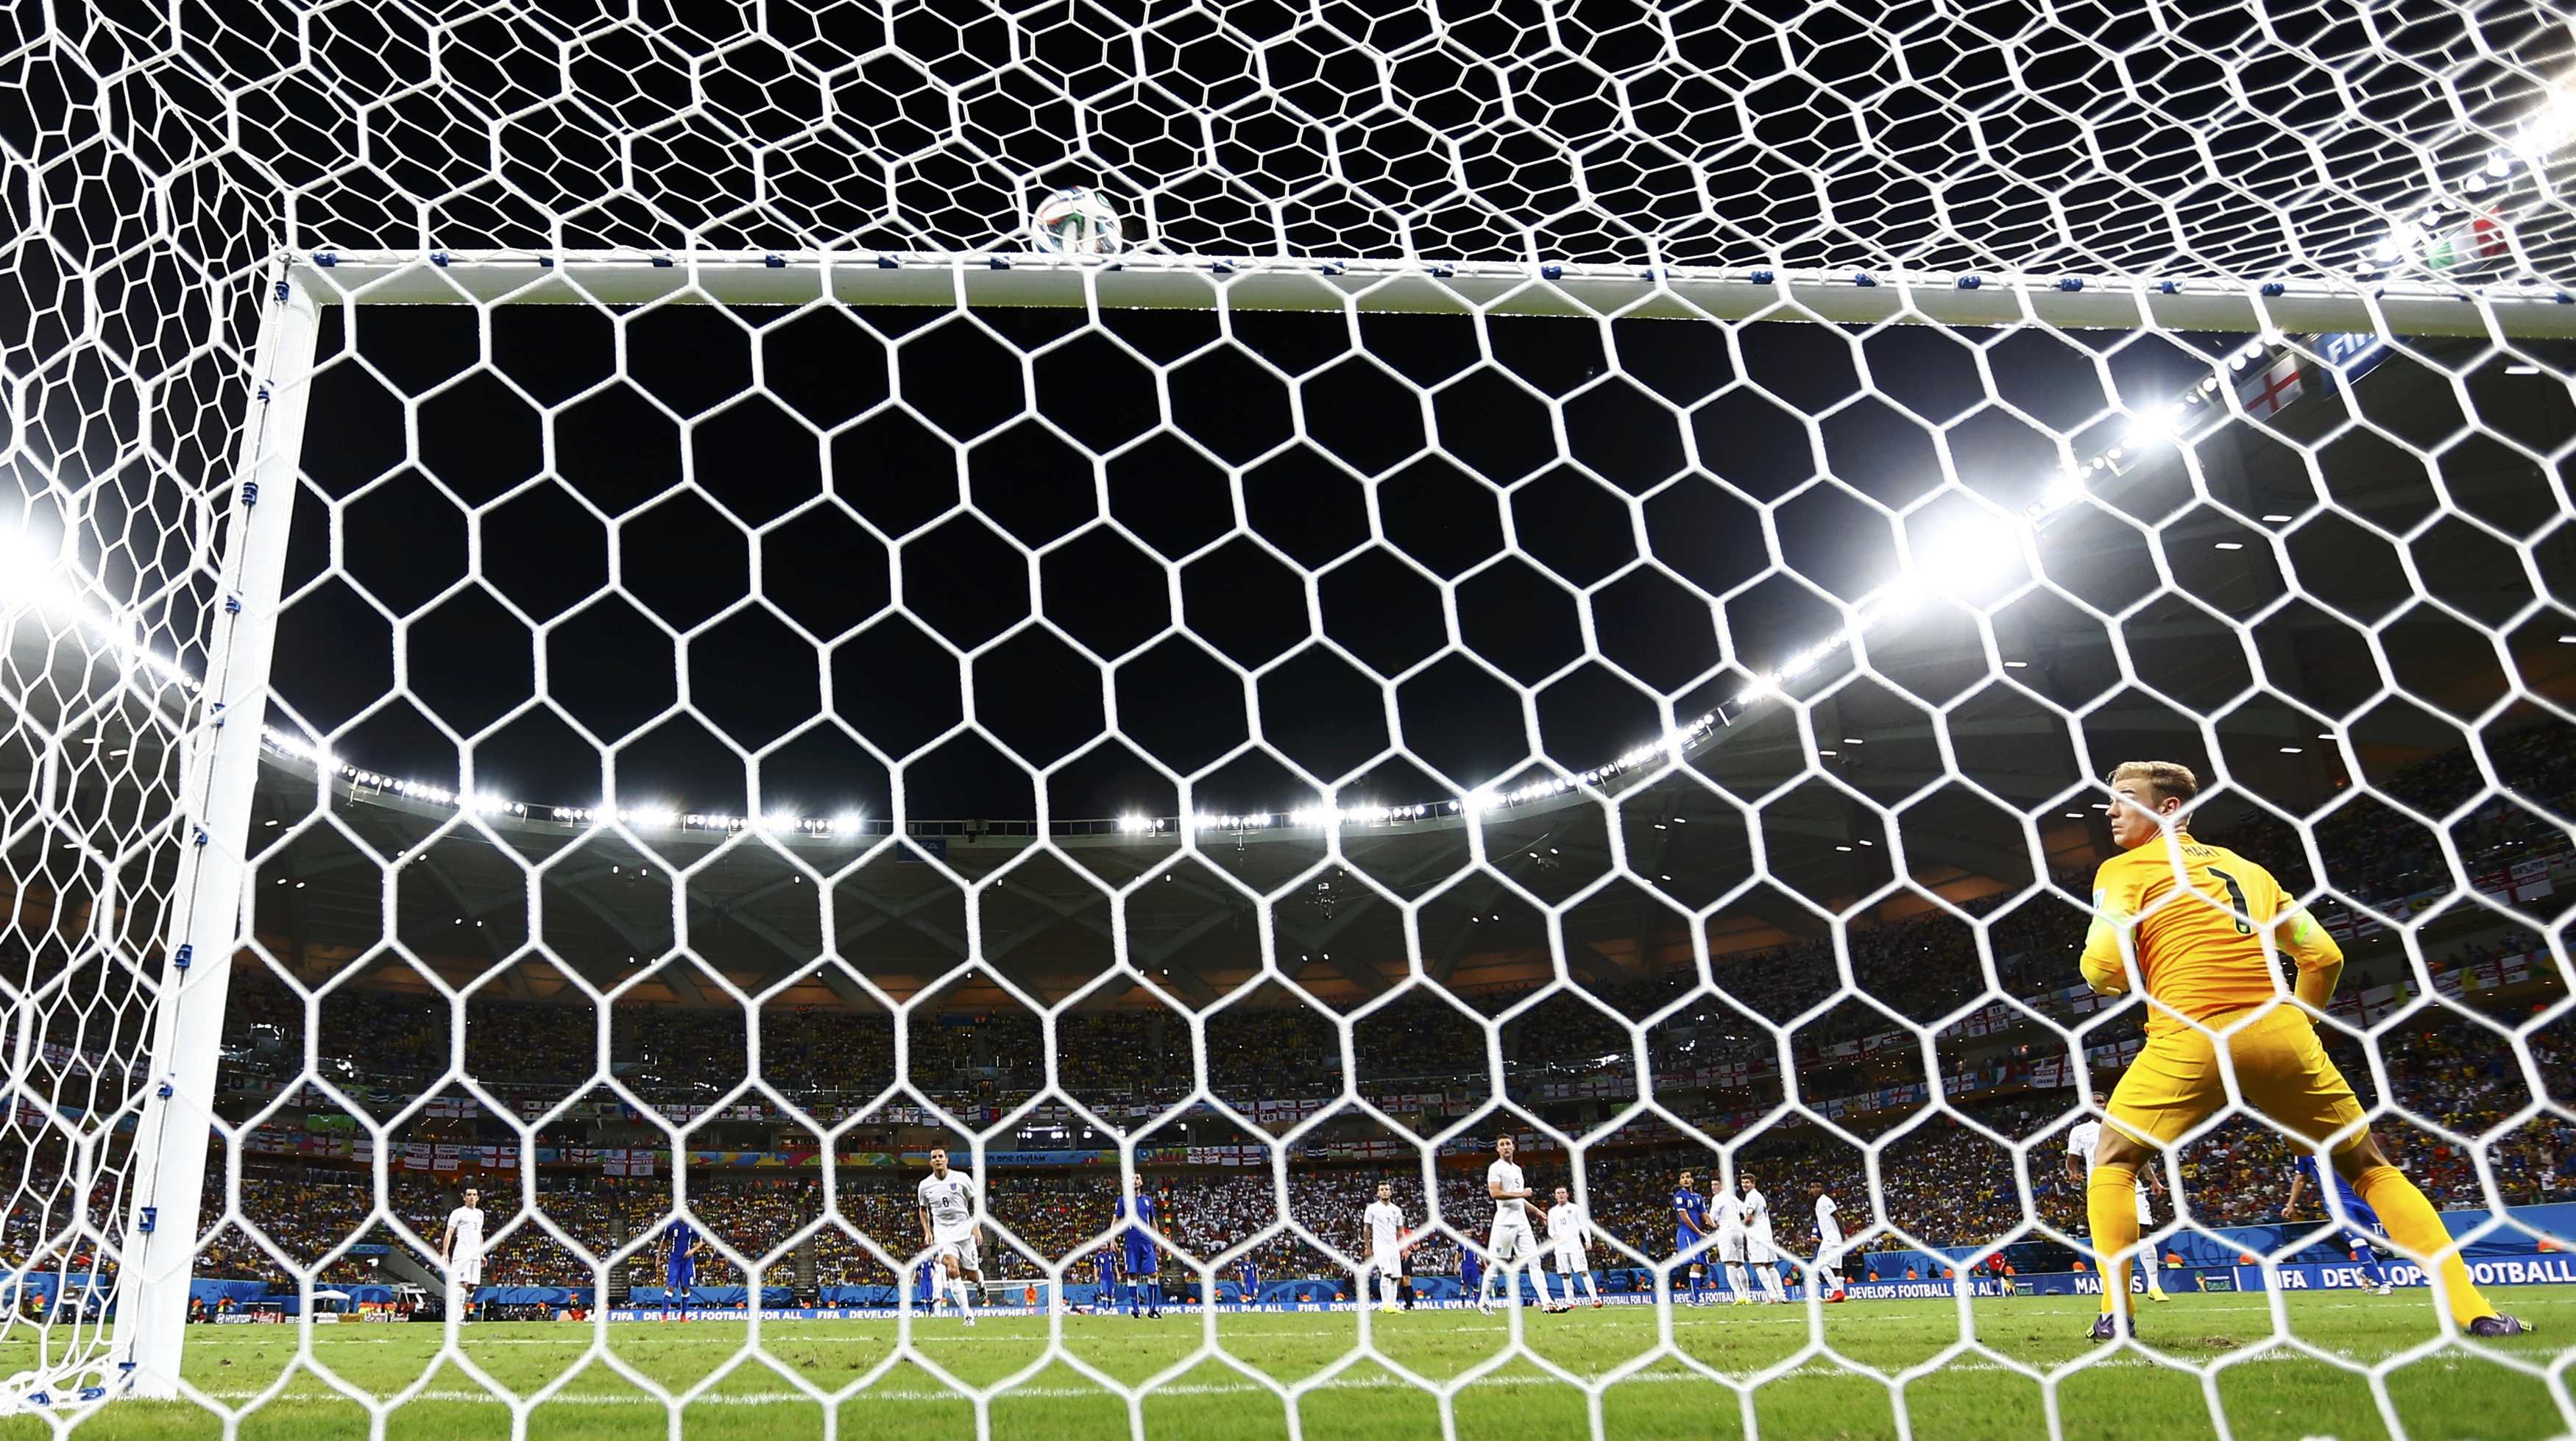 England's Joe Hart (R) watches as the ball from Italy's Andrea Pirlo's freekick hits the crossbar during their 2014 World Cup Group D soccer match at the Amazonia arena in Manaus June 14, 2014.  REUTERS/Kai Pfaffenbach (BRAZIL  - Tags: TPX IMAGES OF THE D